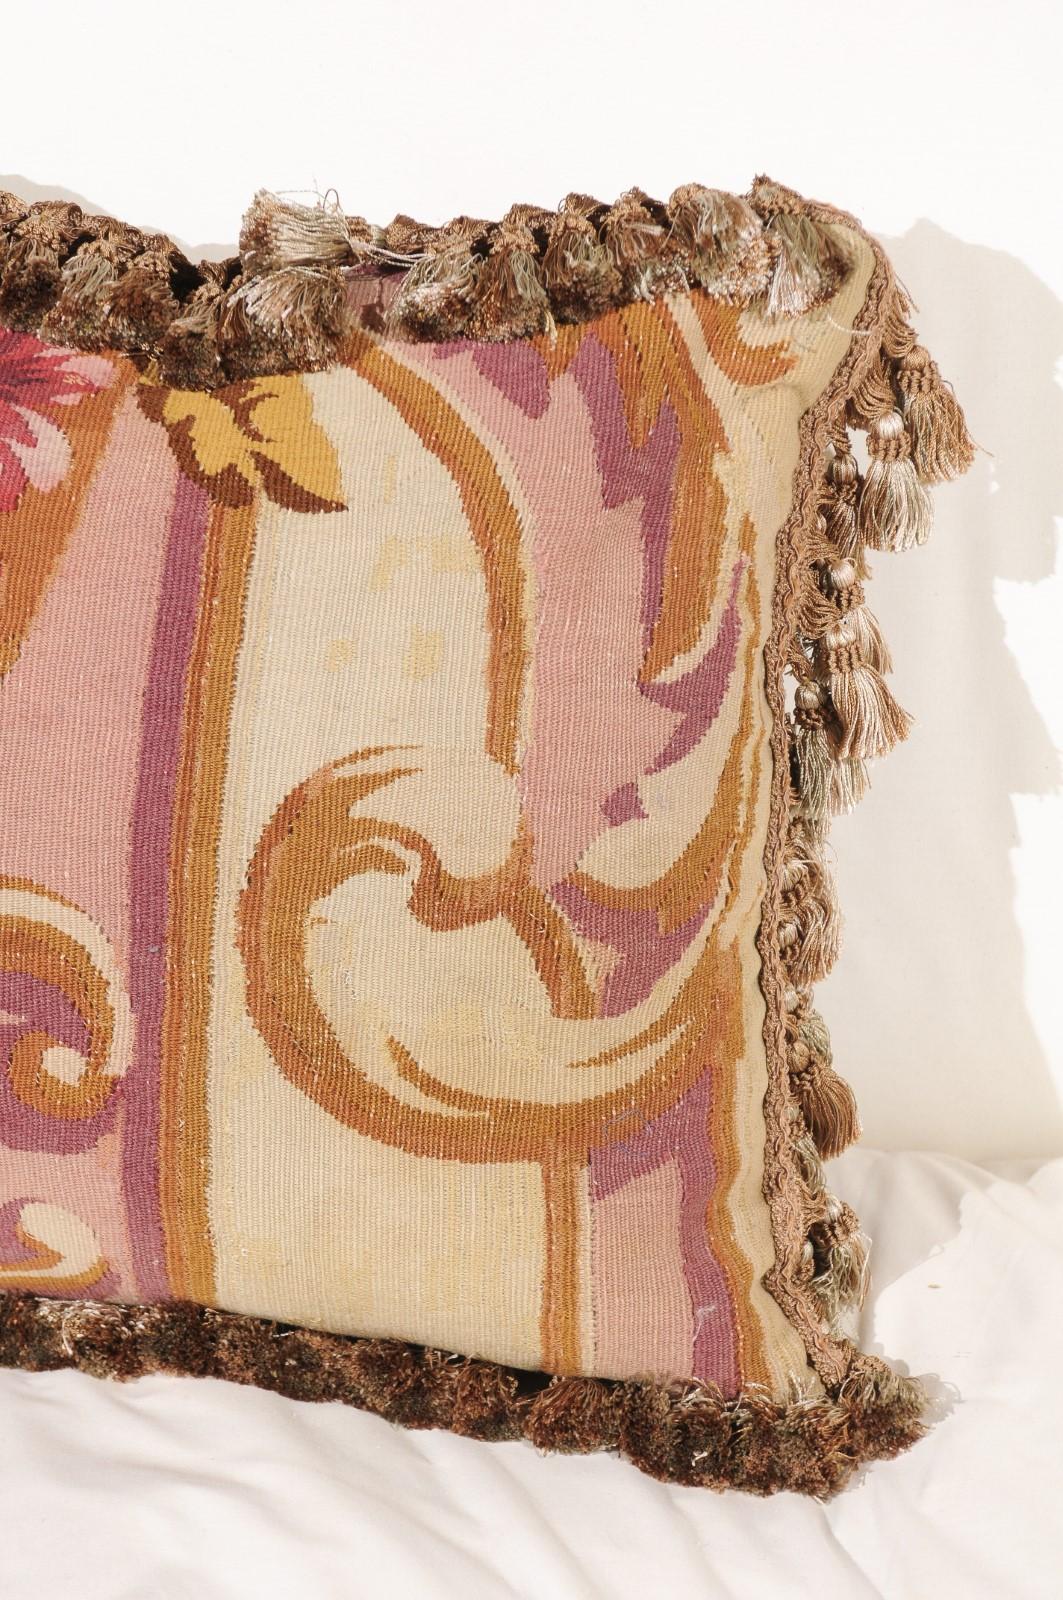 French 19th Century Aubusson Tapestry Pillow with Tassels and Floral Décor For Sale 2